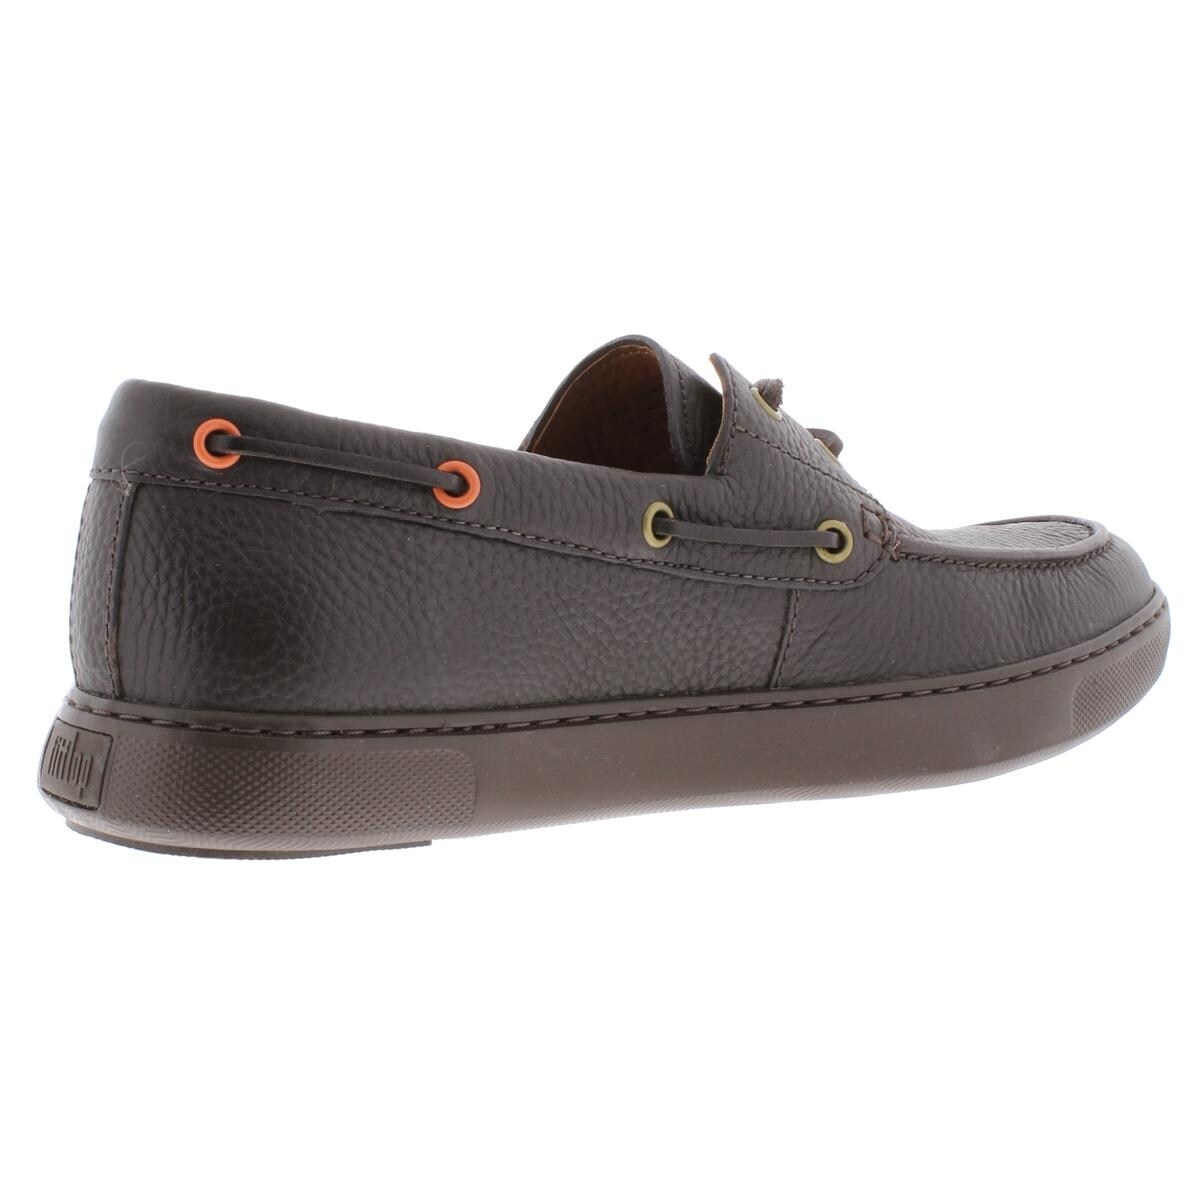 fitflop lawrence boat shoe